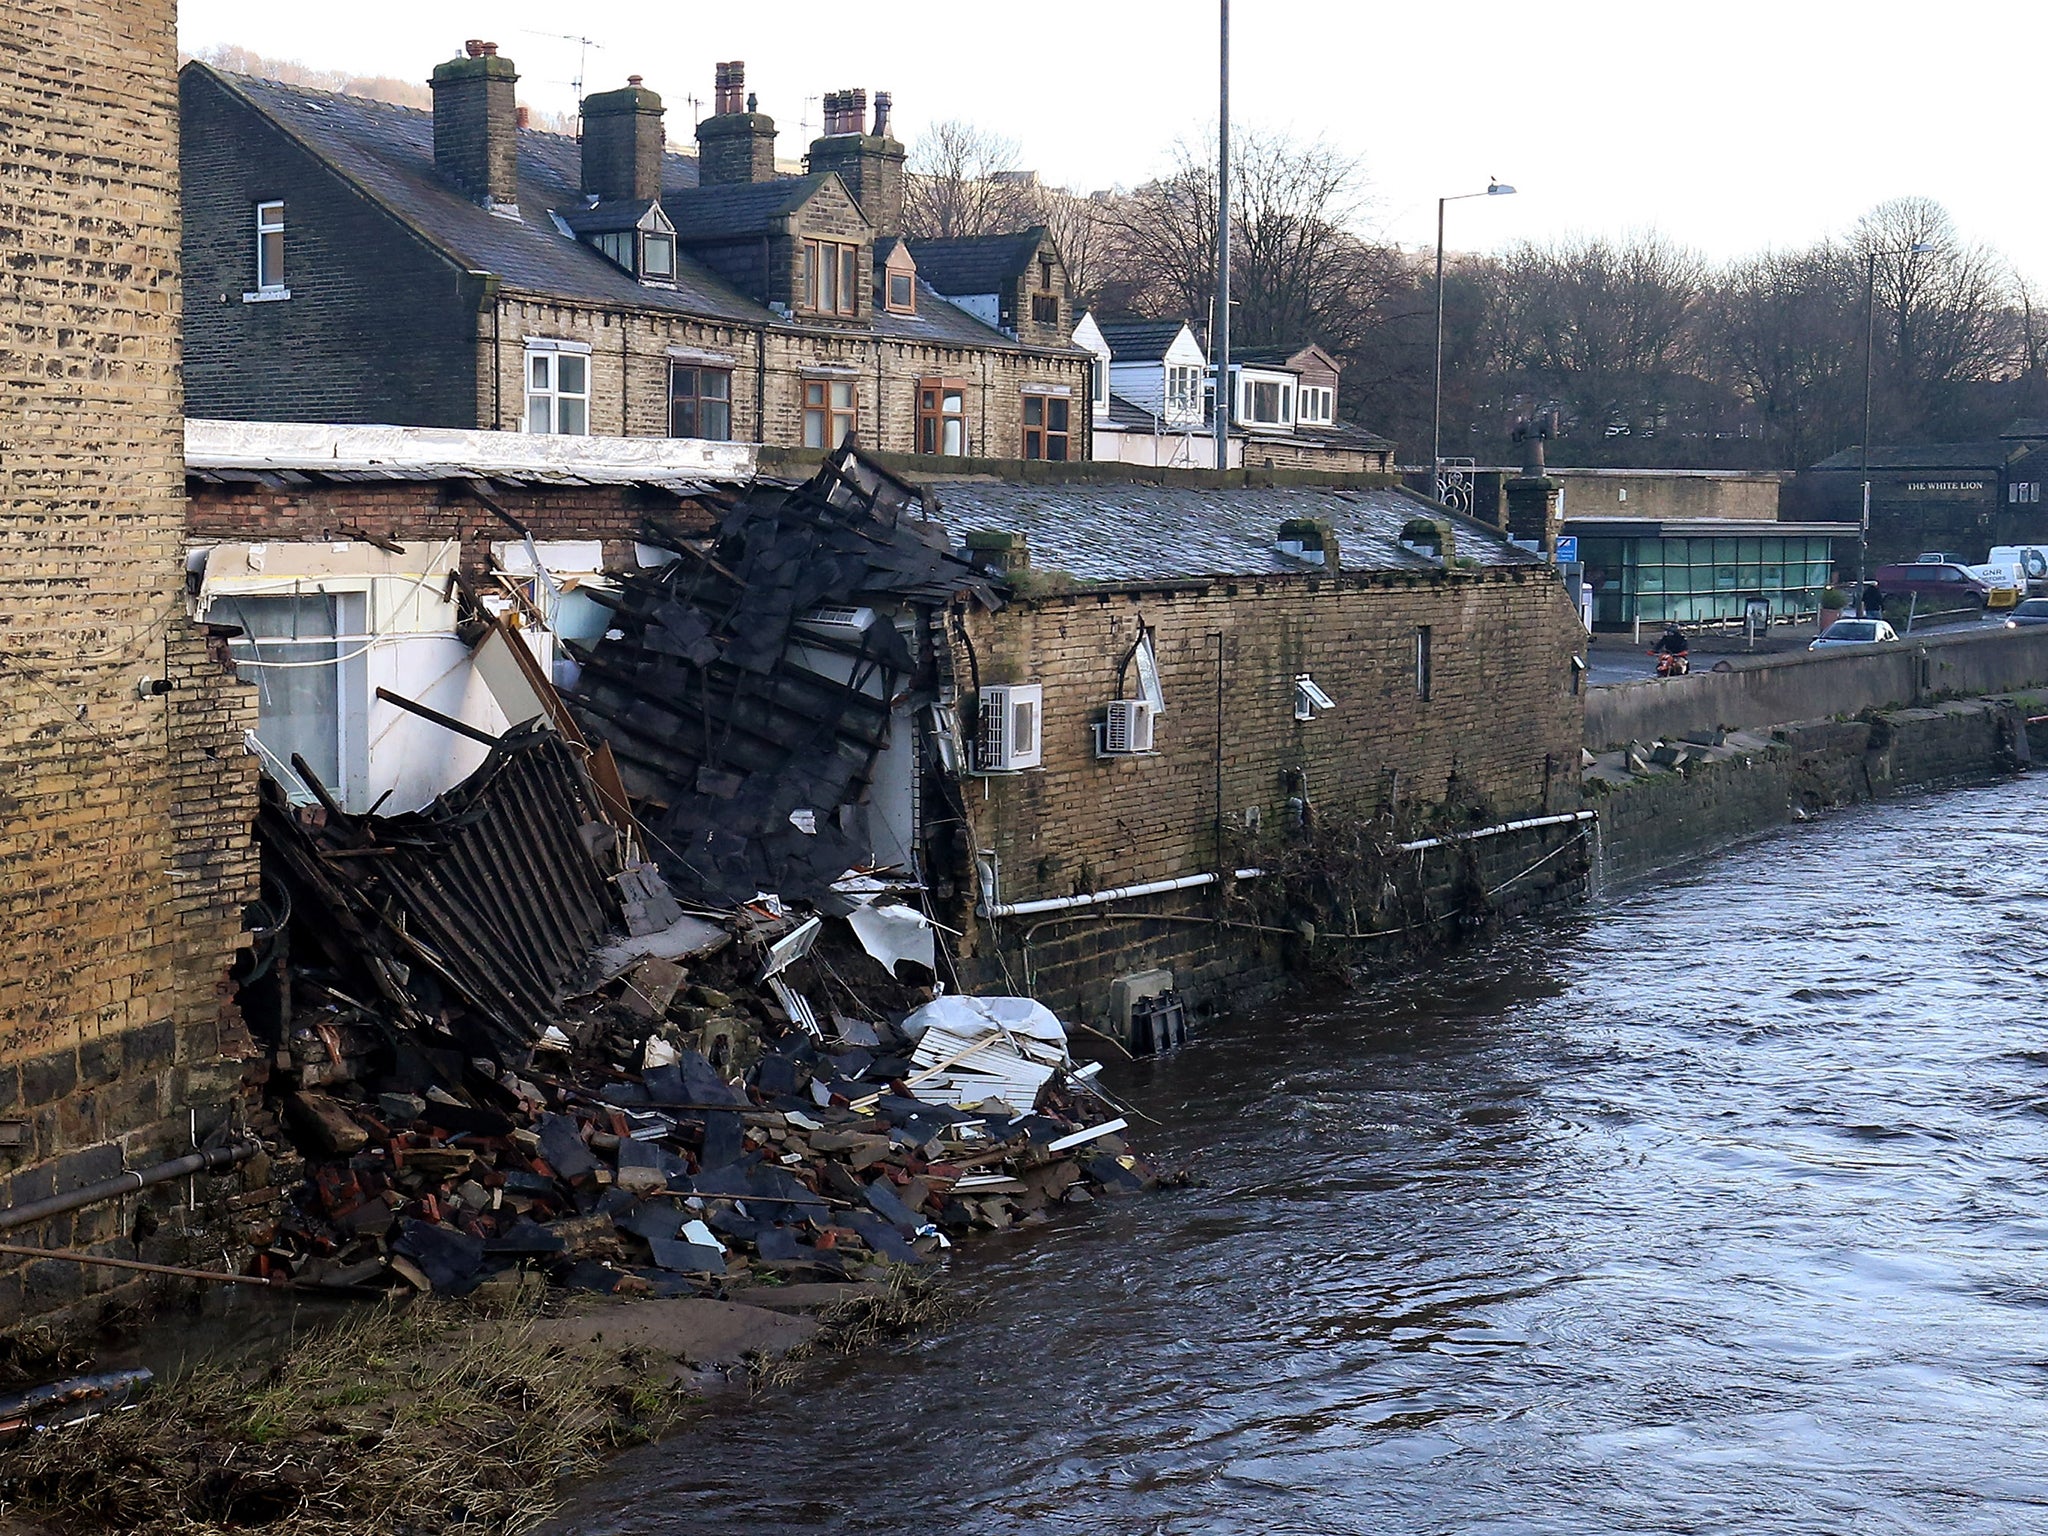 Part of a building collapsed into the river after yesterday's floods in Mythelmroyd, England